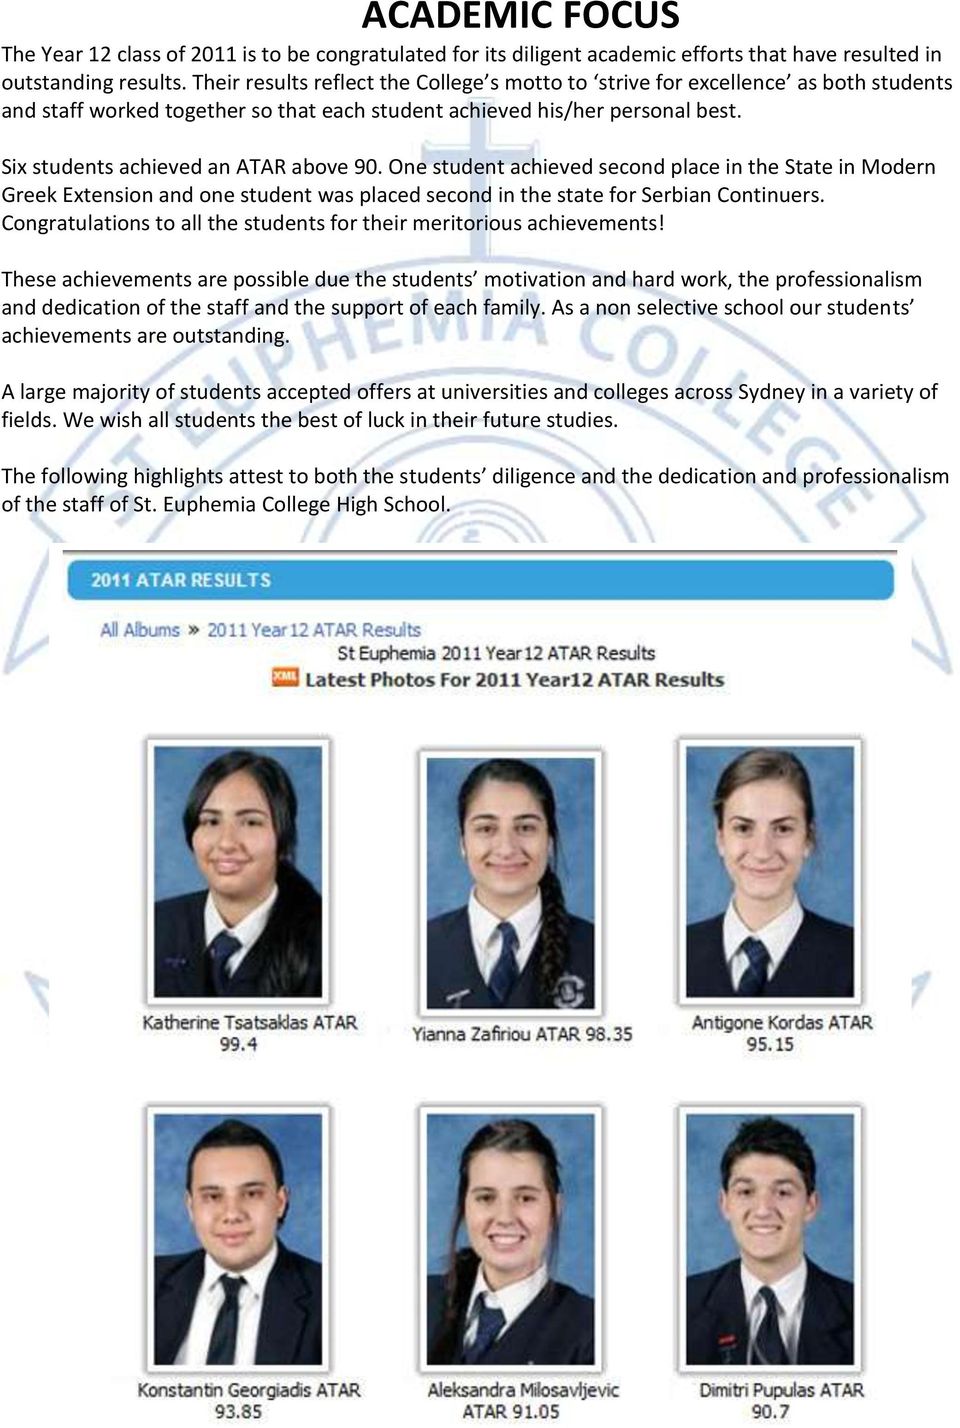 Six students achieved an ATAR above 90. One student achieved second place in the State in Modern Greek Extension and one student was placed second in the state for Serbian Continuers.